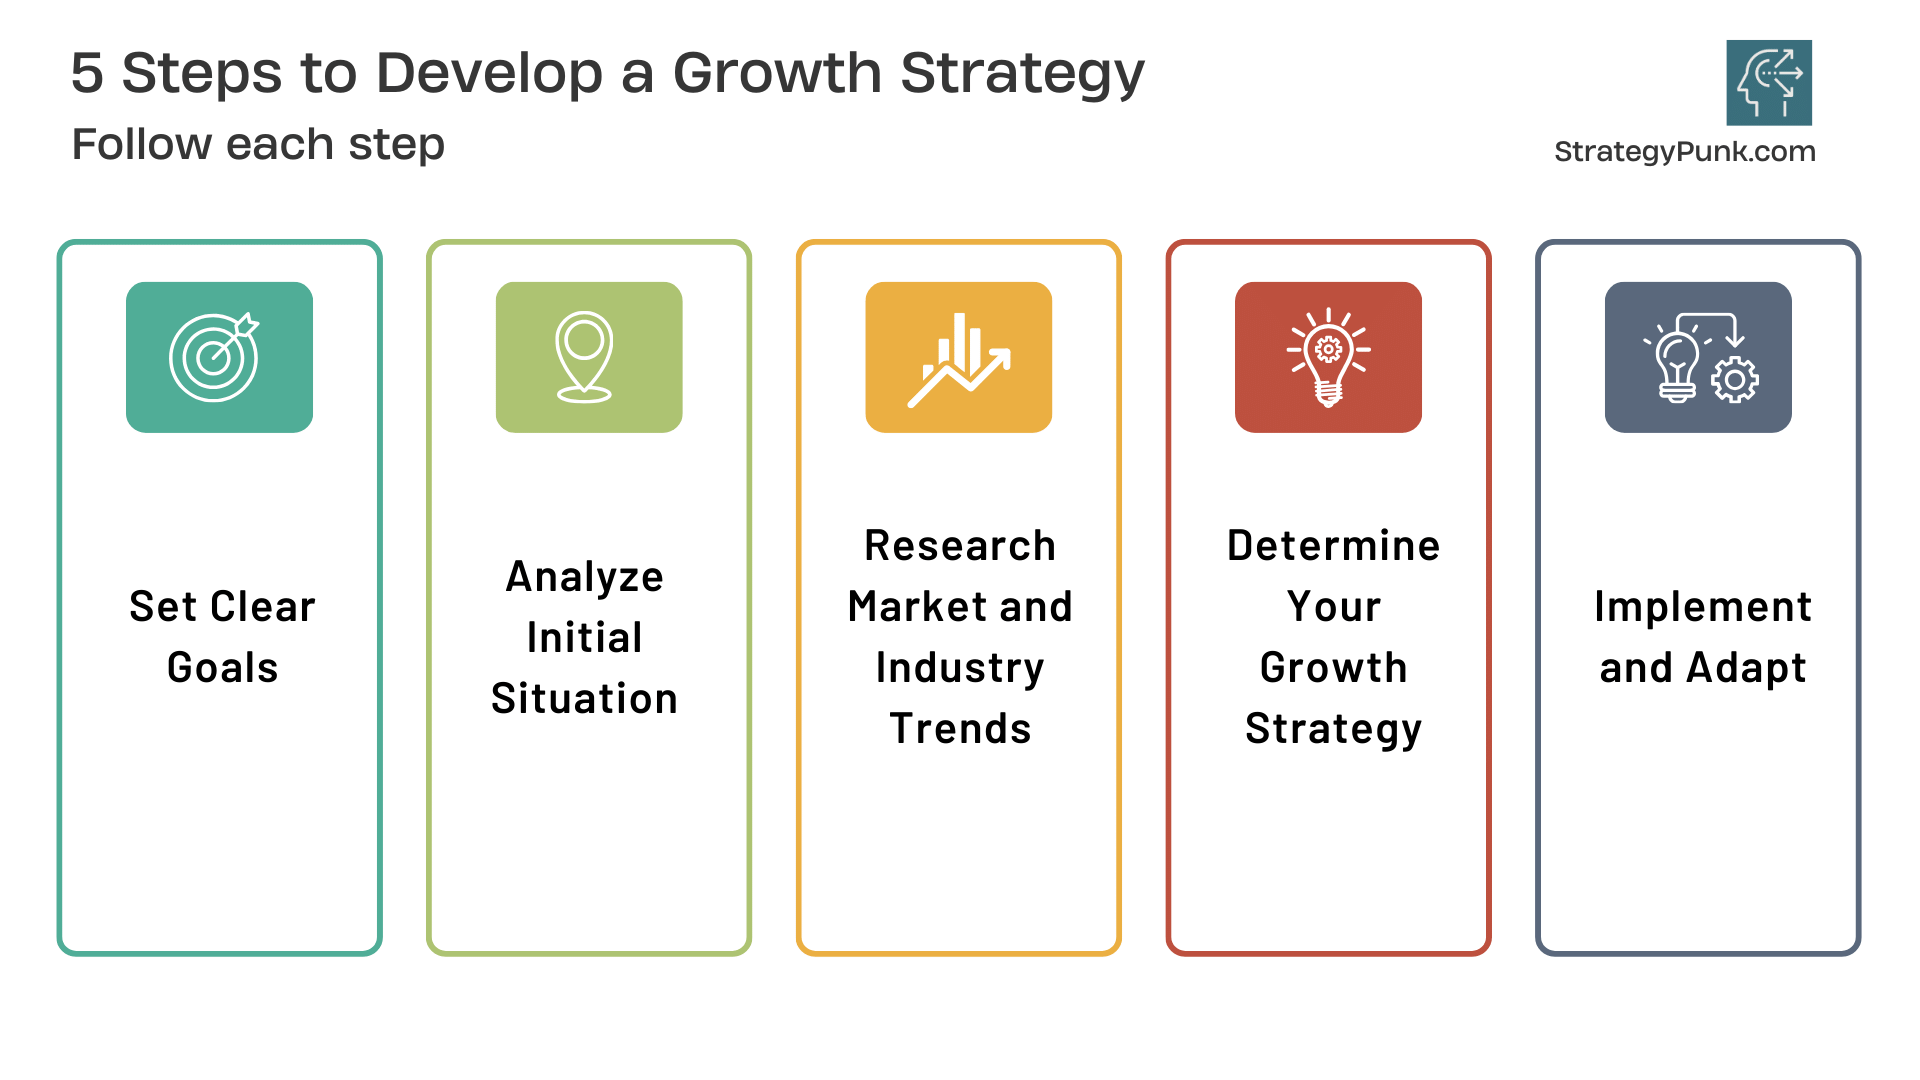 5 Steps to Develop a Growth Strategy (Free PowerPoint Template)